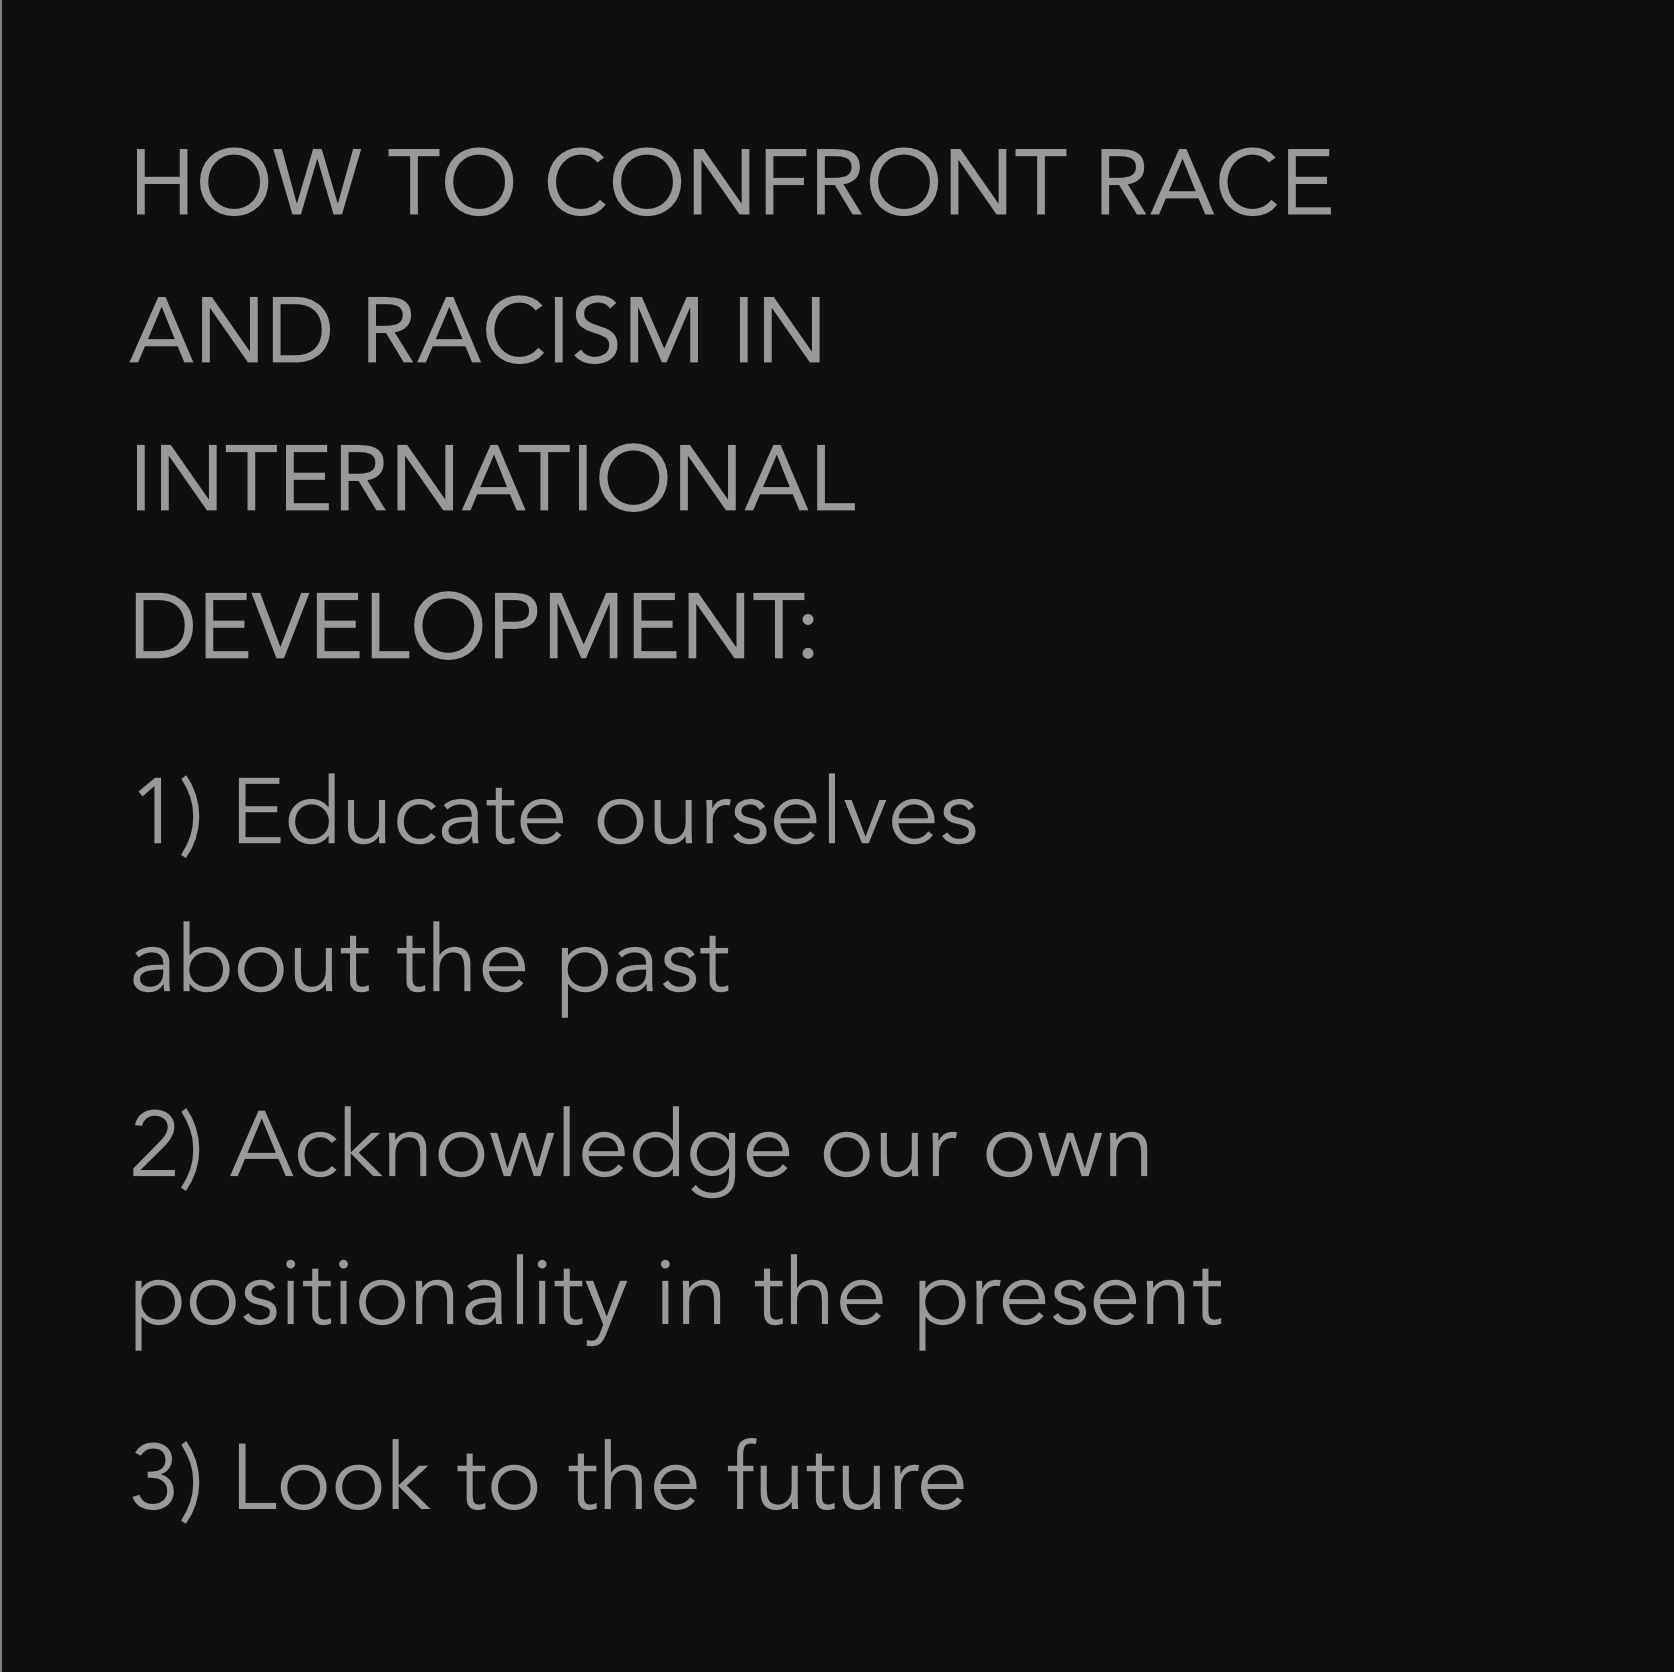 January 19 | How to confront race and racism in international development